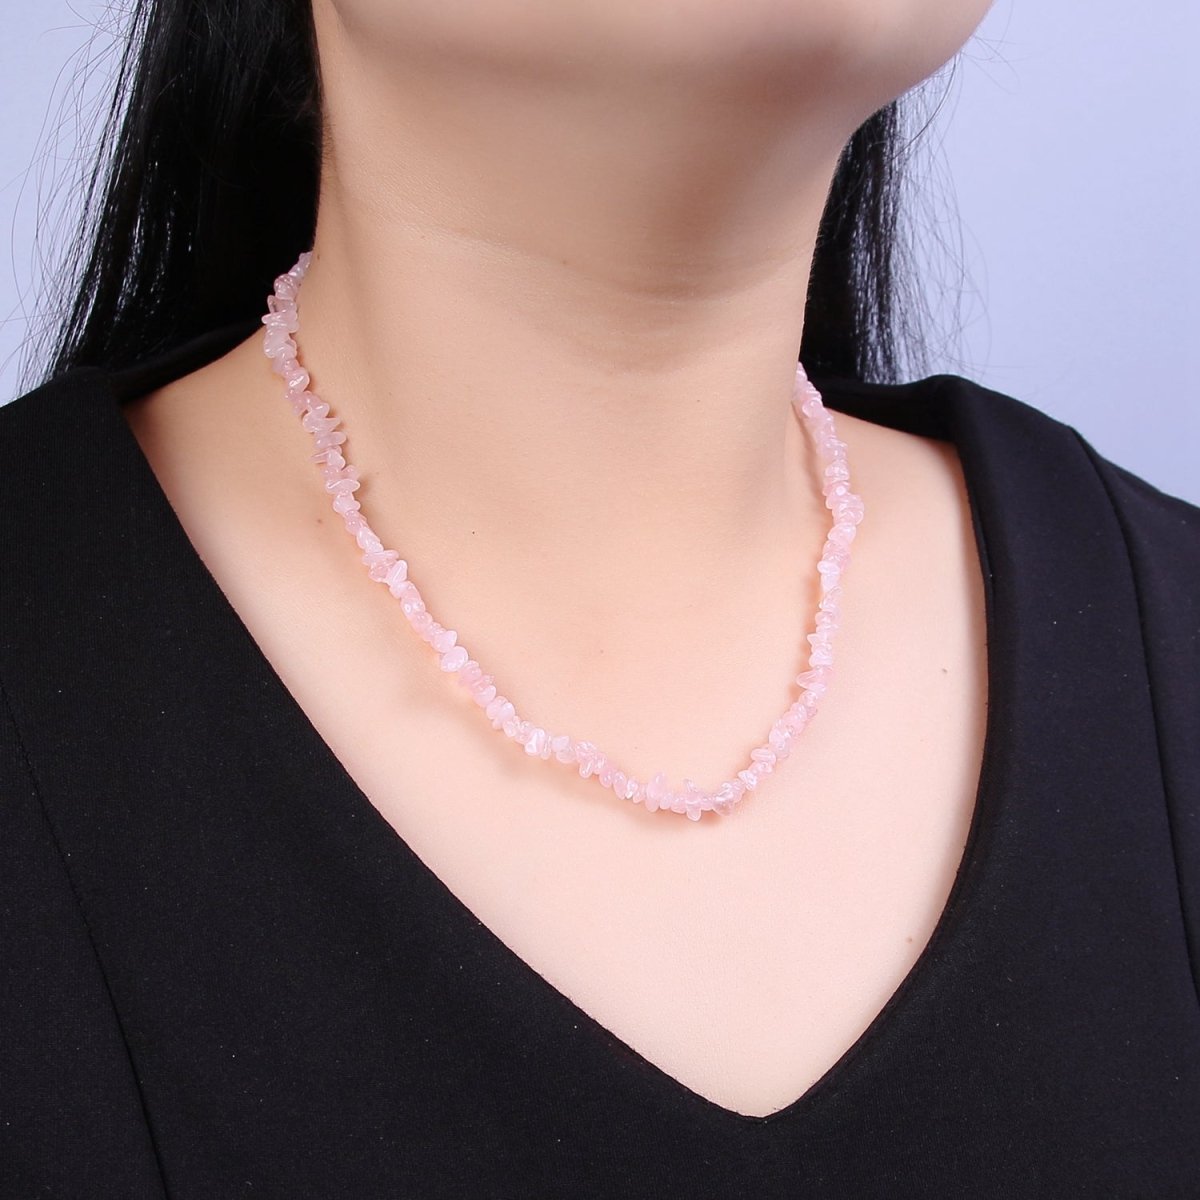 Rose Quartz Beaded Necklace - Chip Necklace Healing Crystals, Gemstone Necklace, Handmade Jewelry, Crystal Necklace | WA-637 Clearance Pricing - DLUXCA